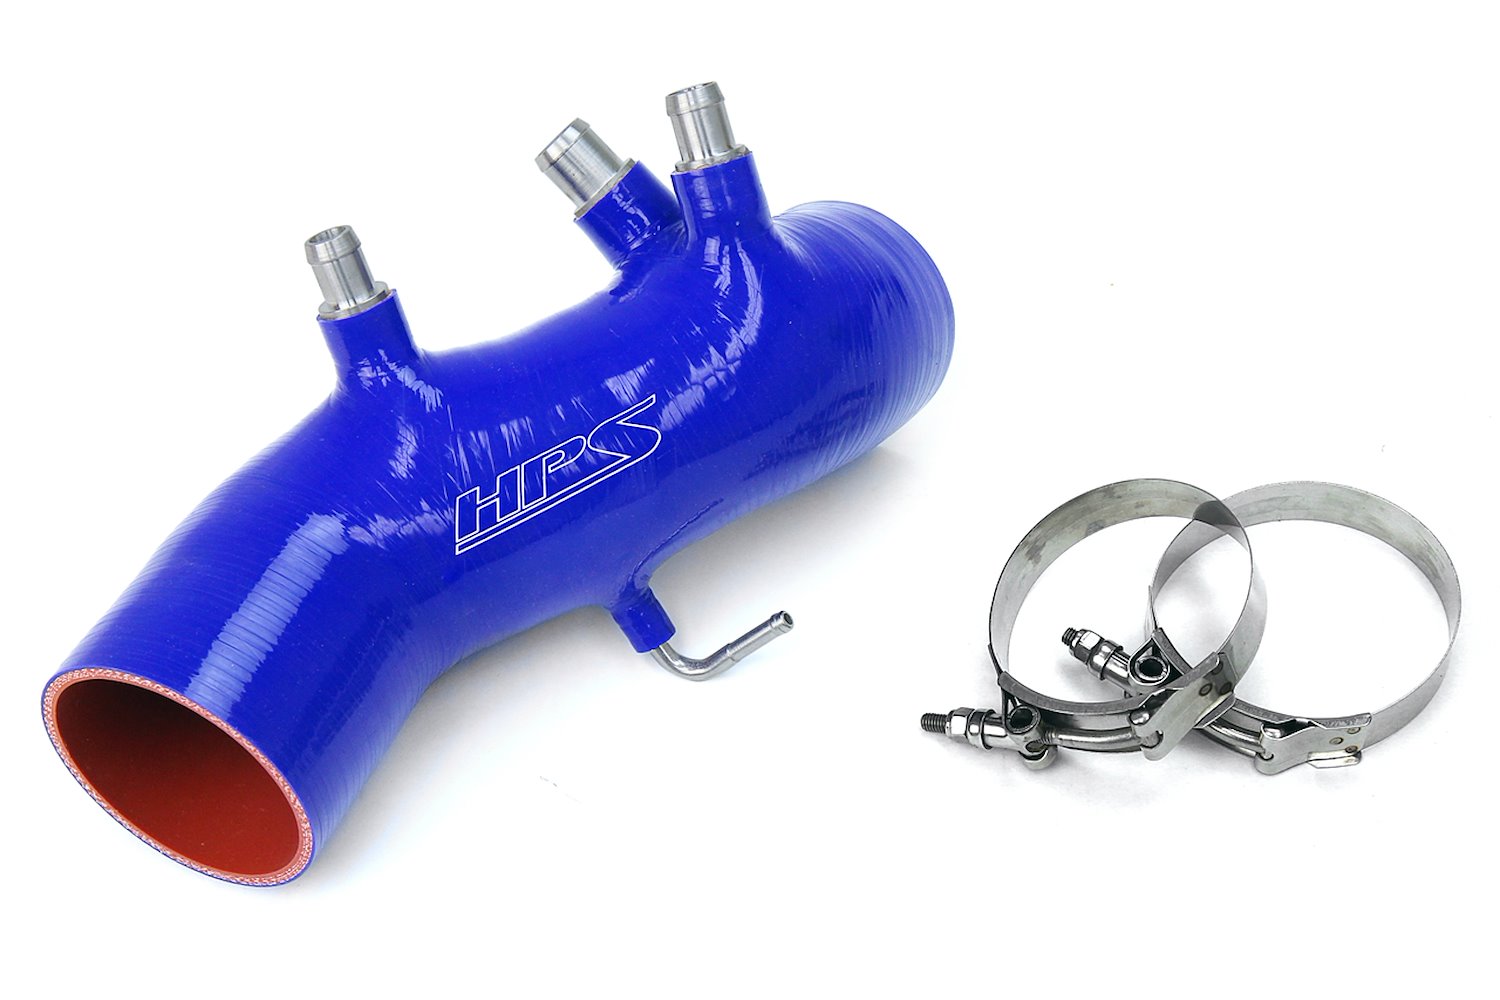 87-17882-BLUE Silicone Air Intake, Replace Stock Restrictive Air Intake, Improve Throttle Response, No Heat Soak